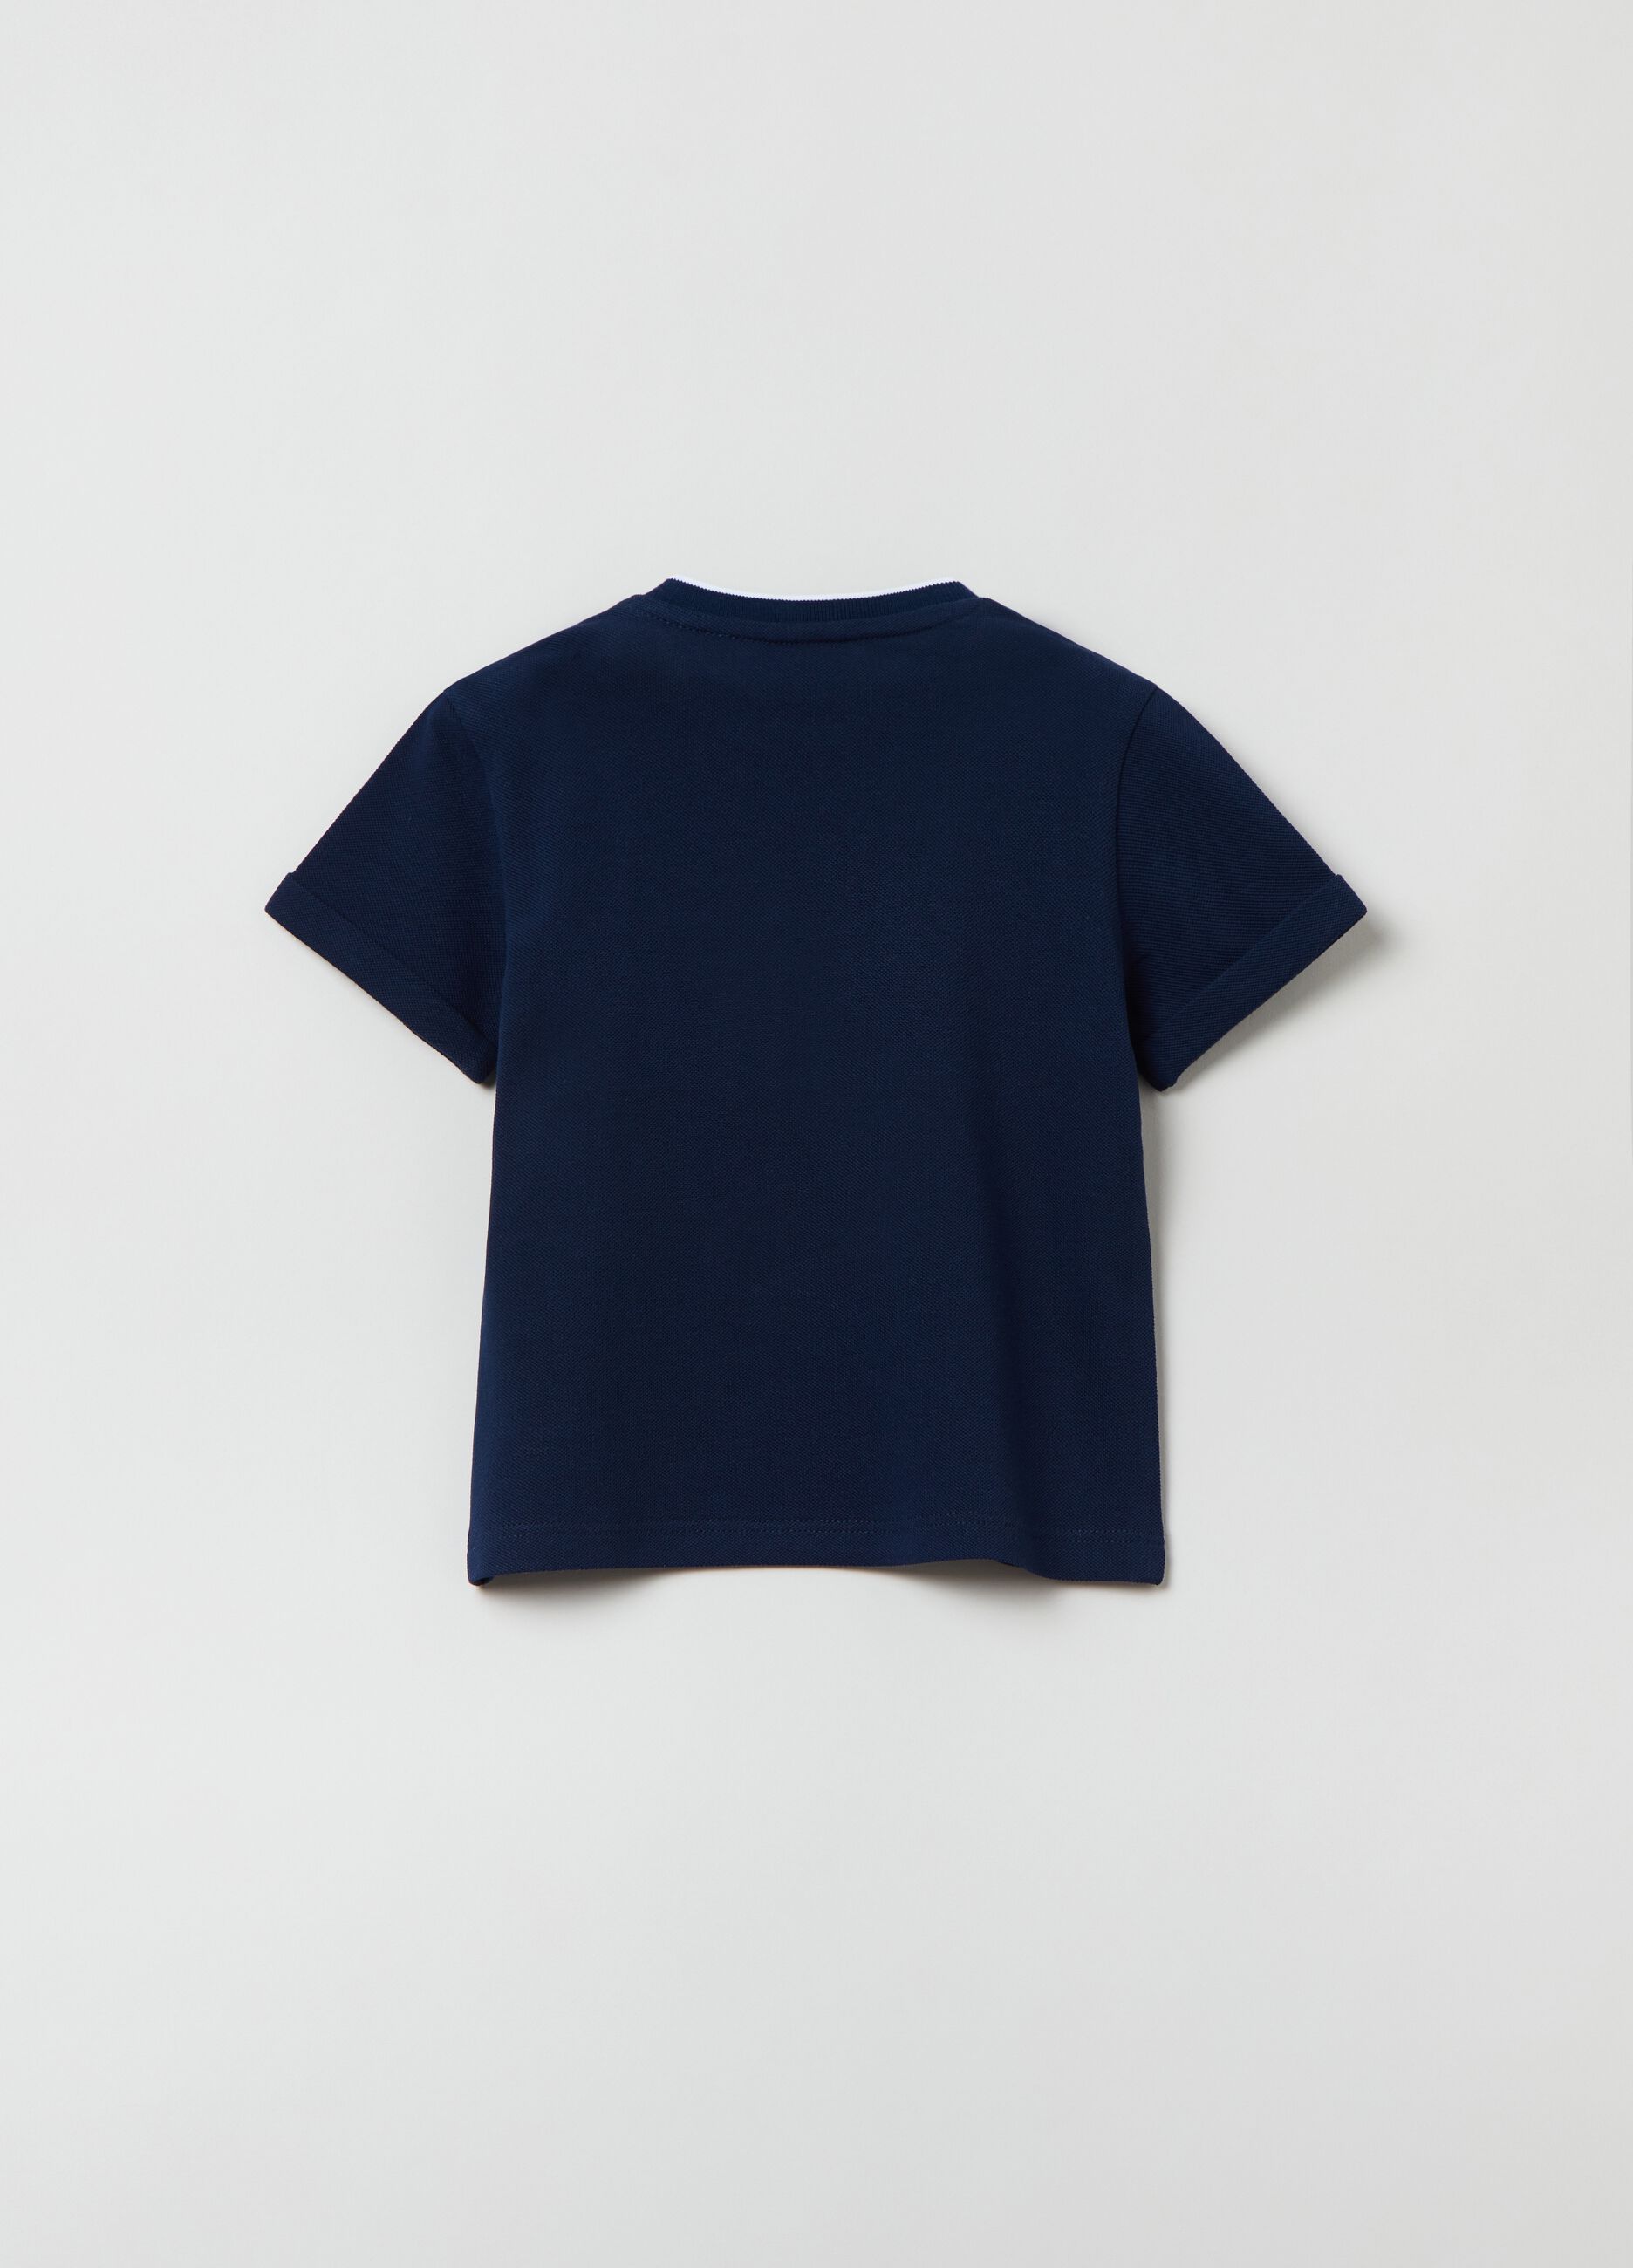 T-shirt in piquet with contrasting trims